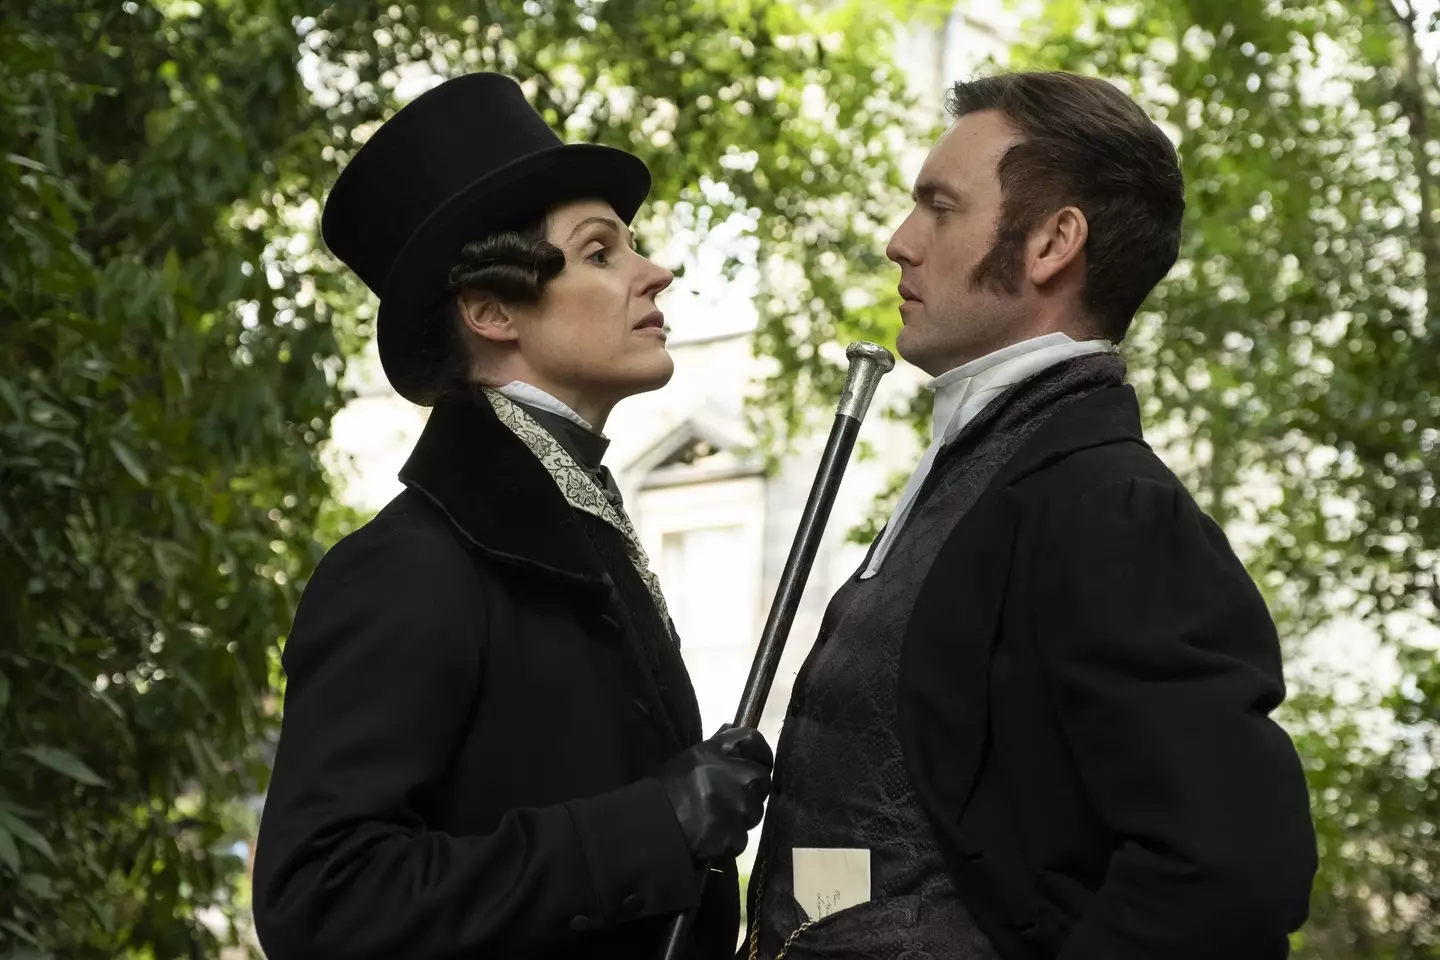 Both seasons of the raunchy period drama are available to stream for free on BBC iPlayer. (BBC)